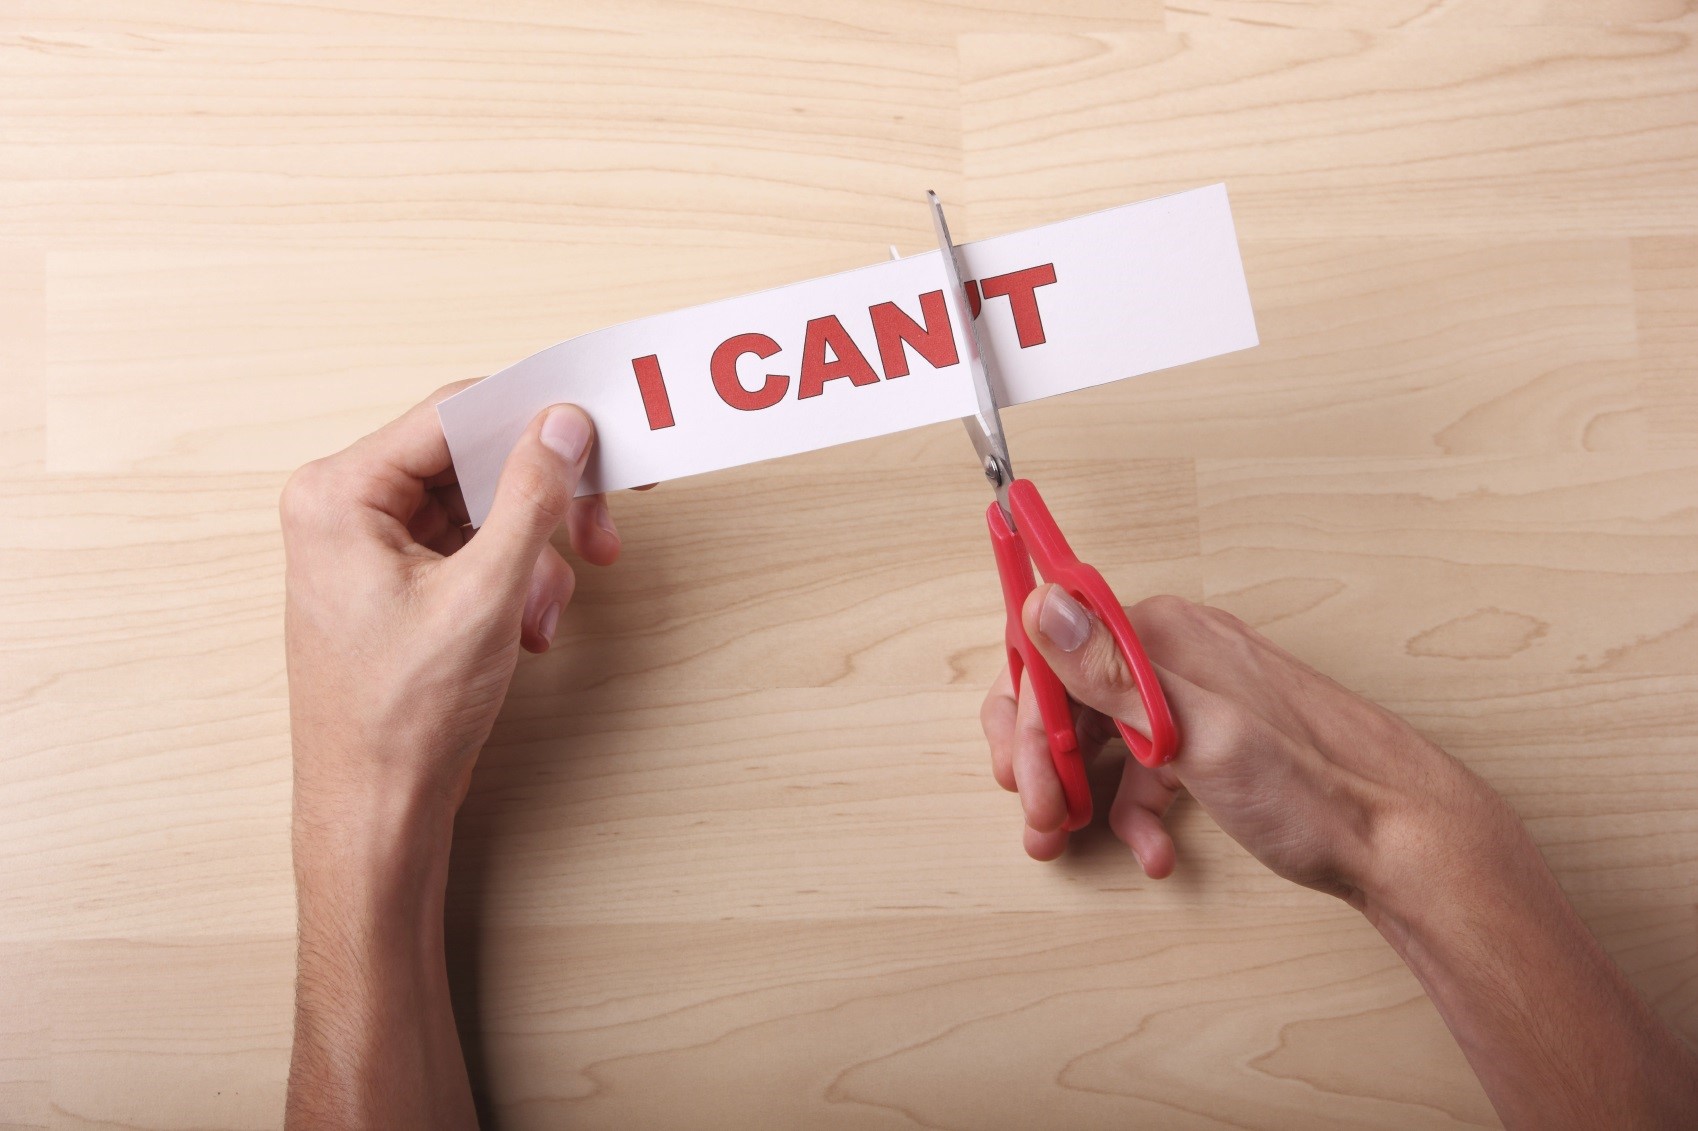 Scissors cutting the "t" off "I can't" to turn negative self talk into positive